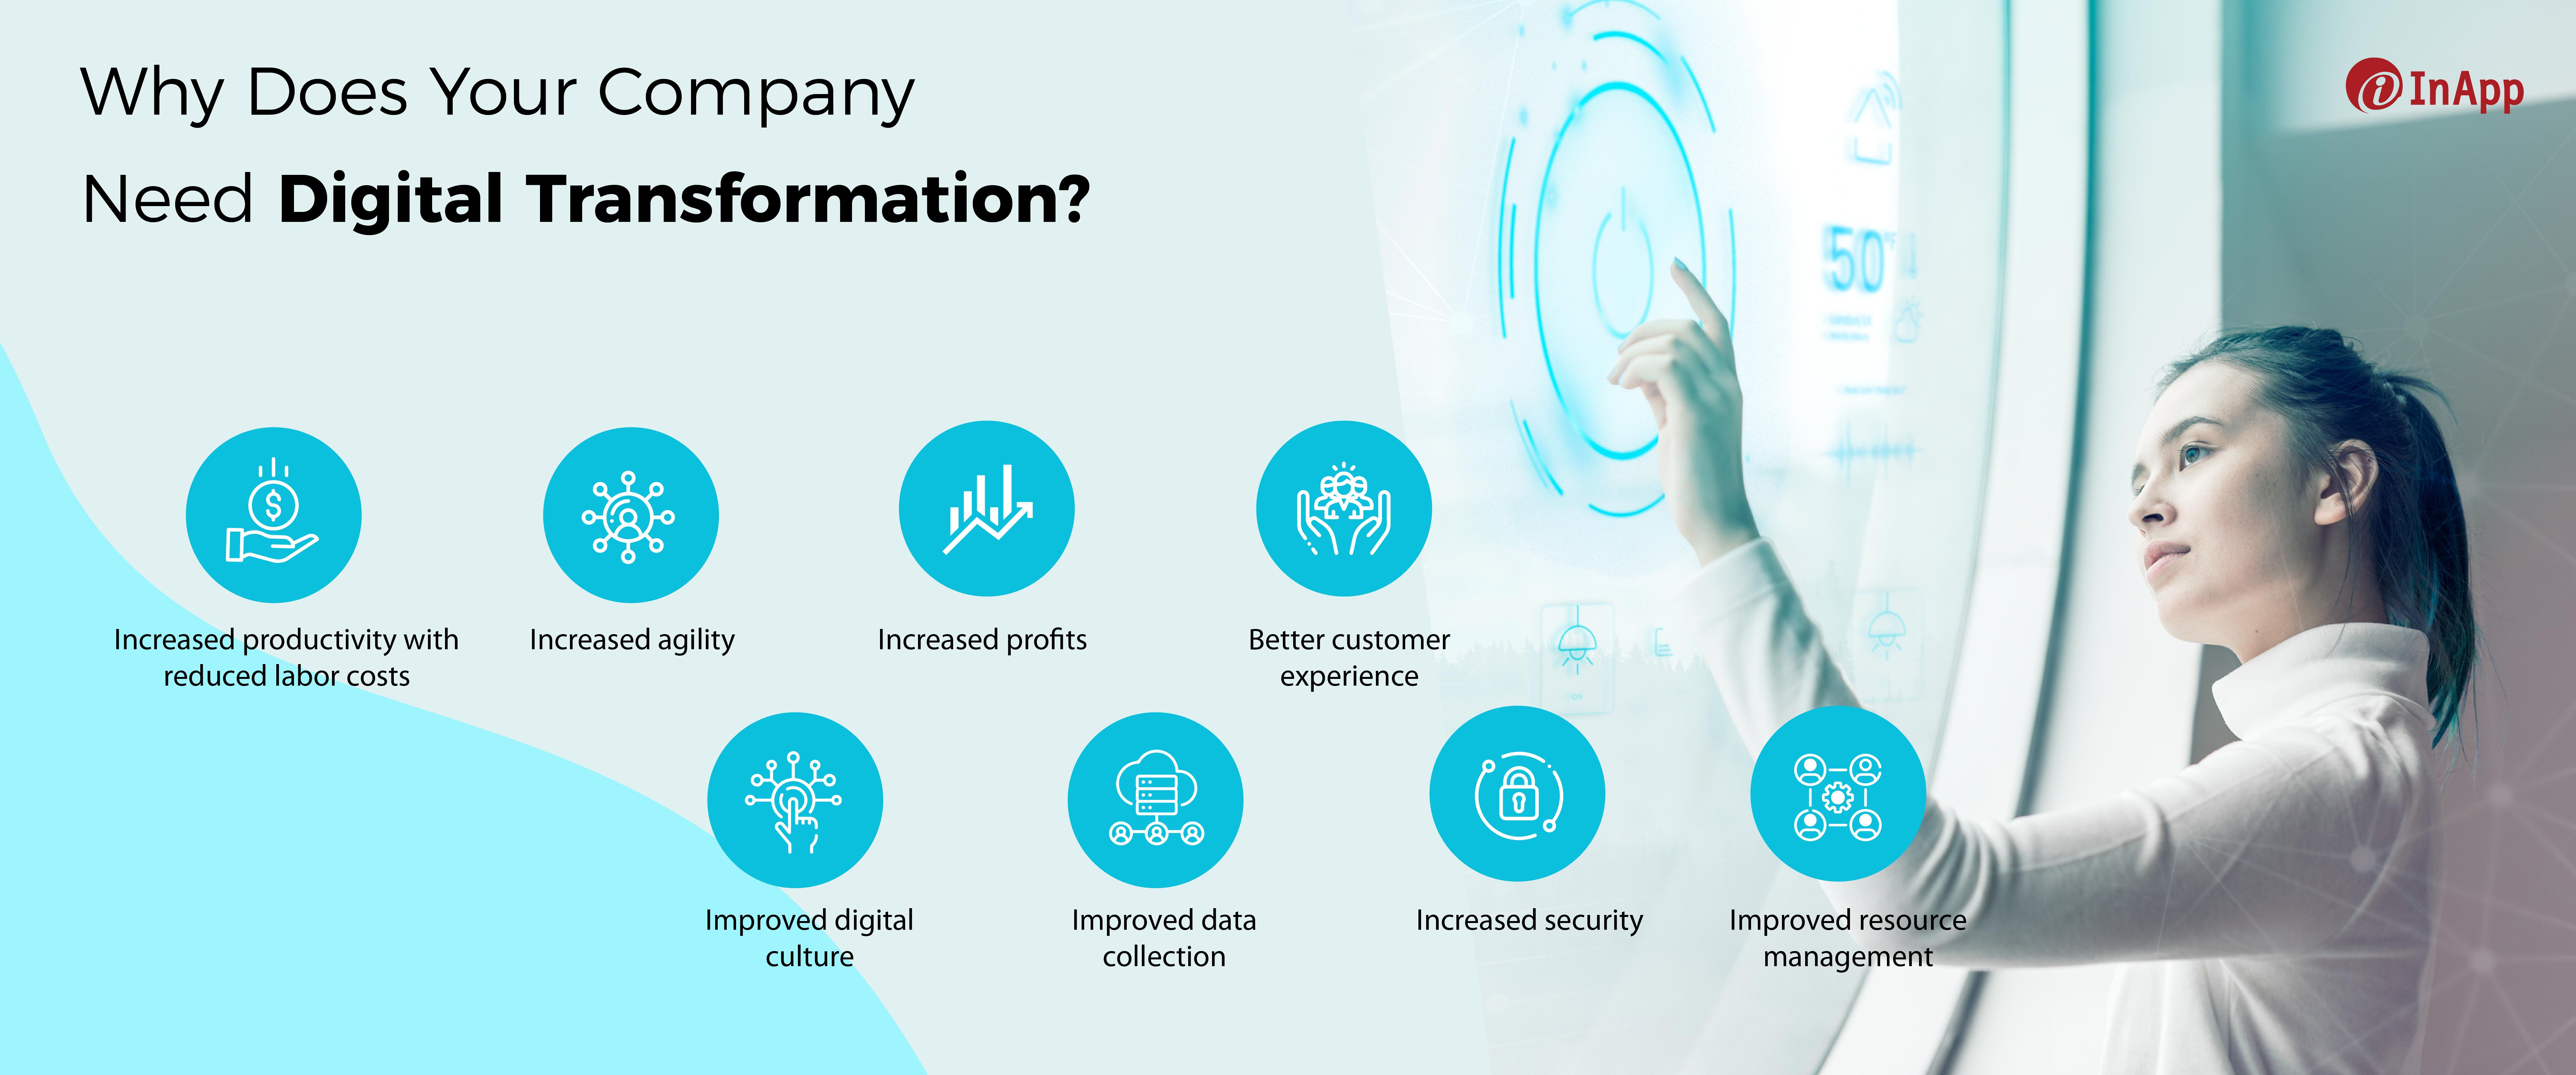 Why Does Your Company Need Digital Transformation? - JustPaste.it